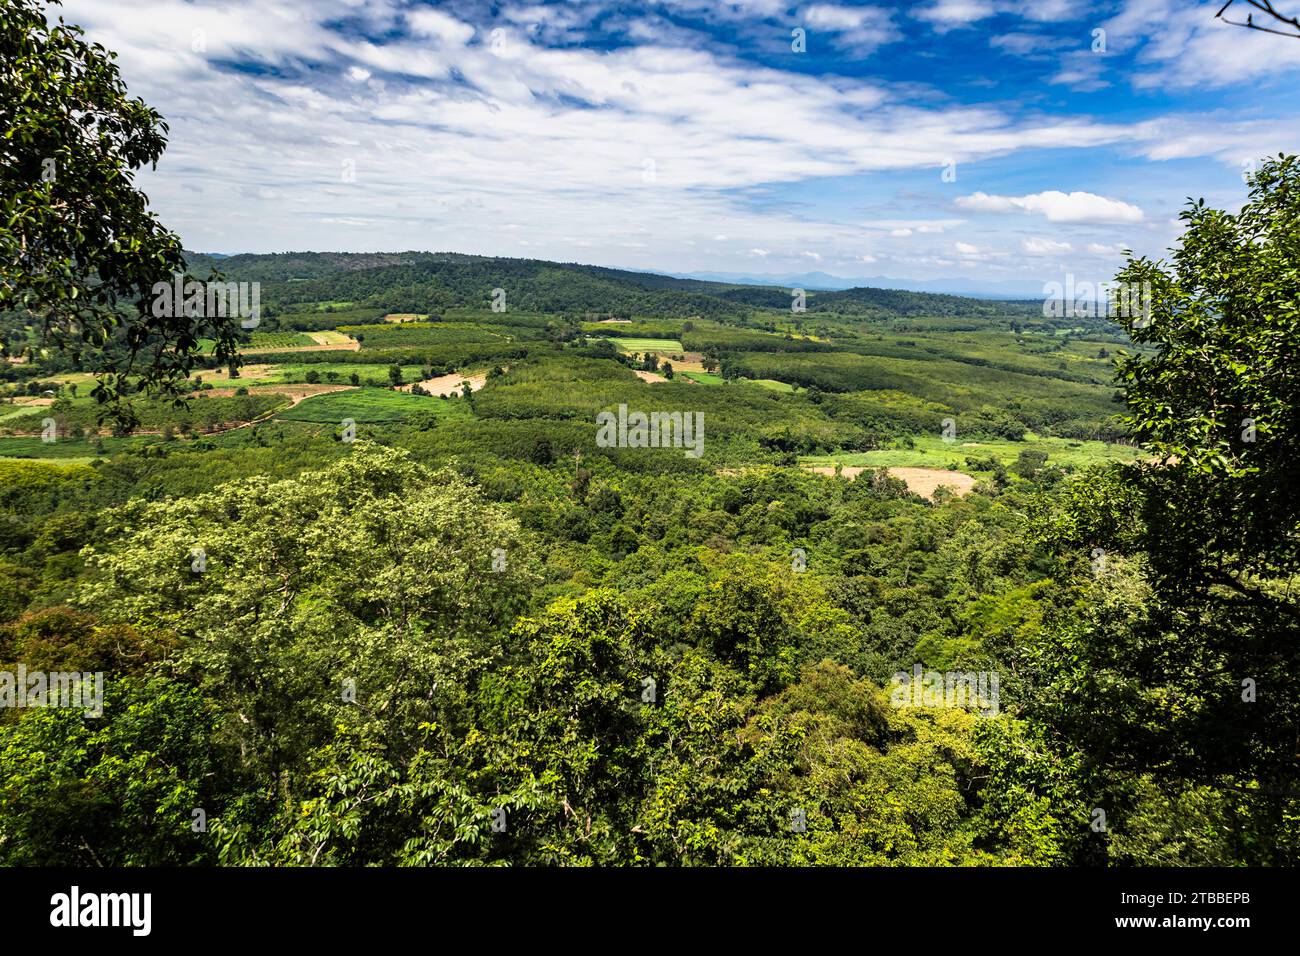 Phu Phra Bat Historical Park, view of plain from hilltop, Ban Phue, Udon Thani, Isan, Thailand, Southeast Asia, Asia Stock Photo